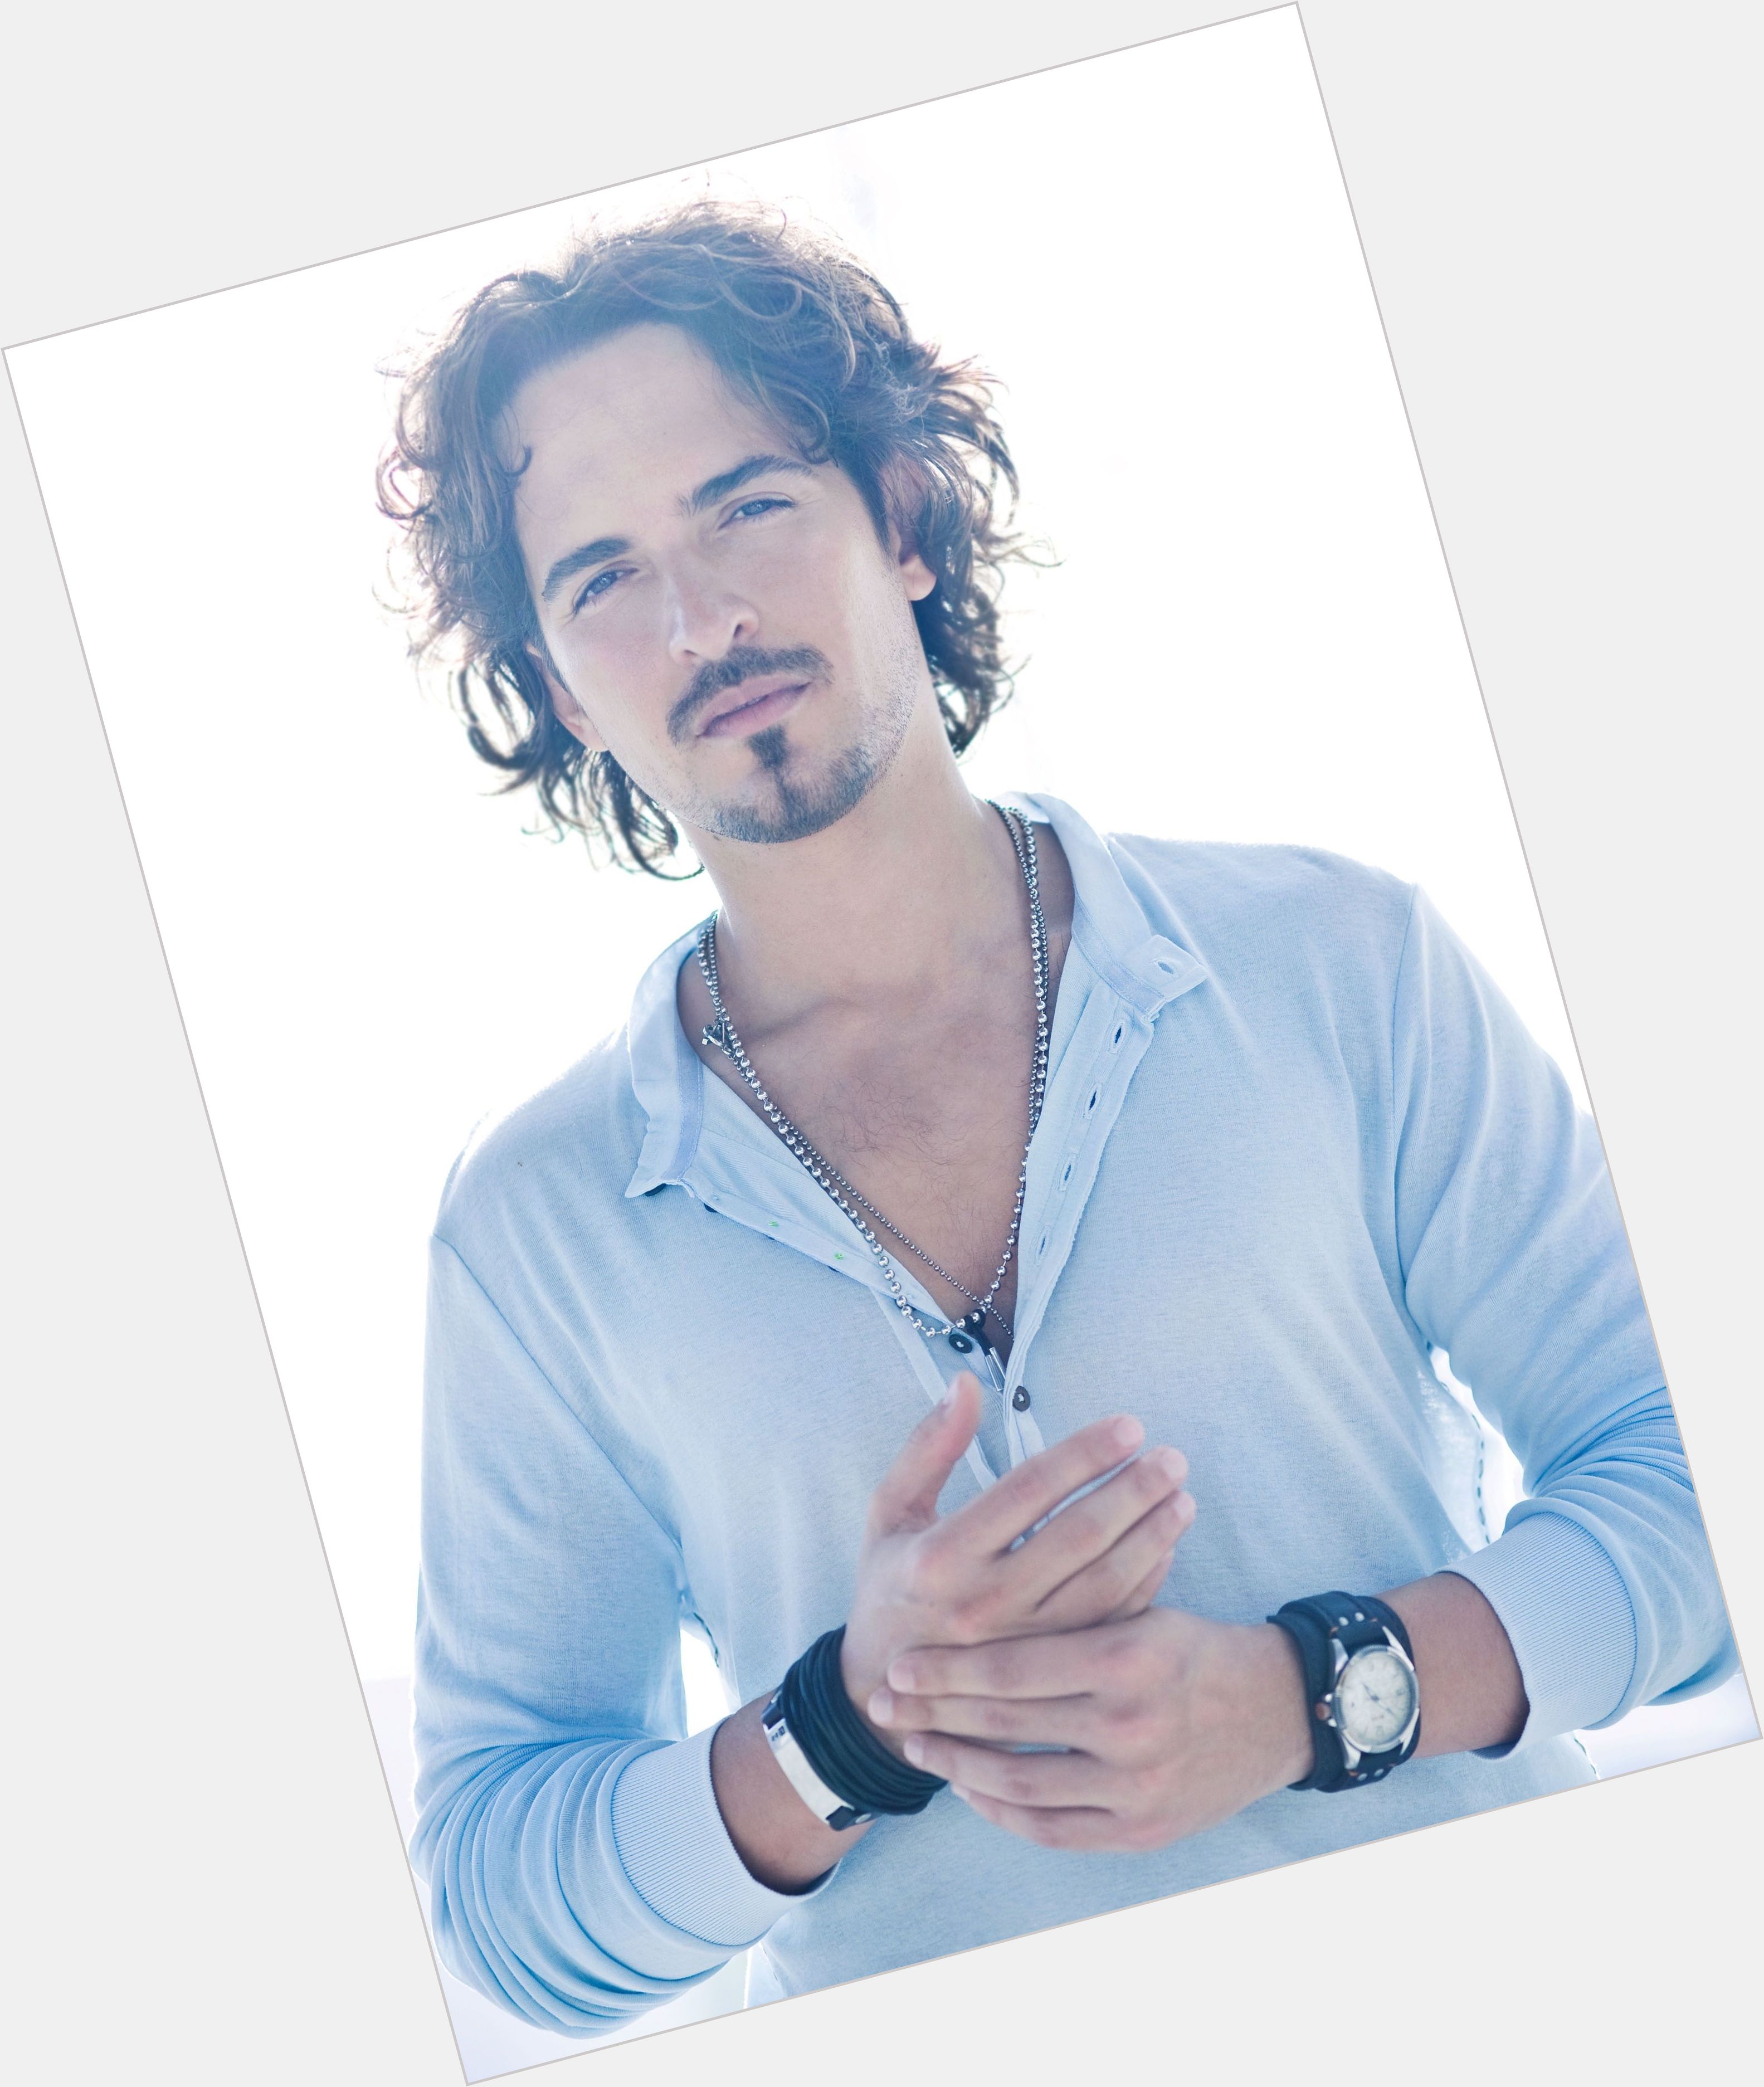 <a href="/hot-men/tommy-torres/where-dating-news-photos">Tommy Torres</a> Average body,  dark brown hair & hairstyles